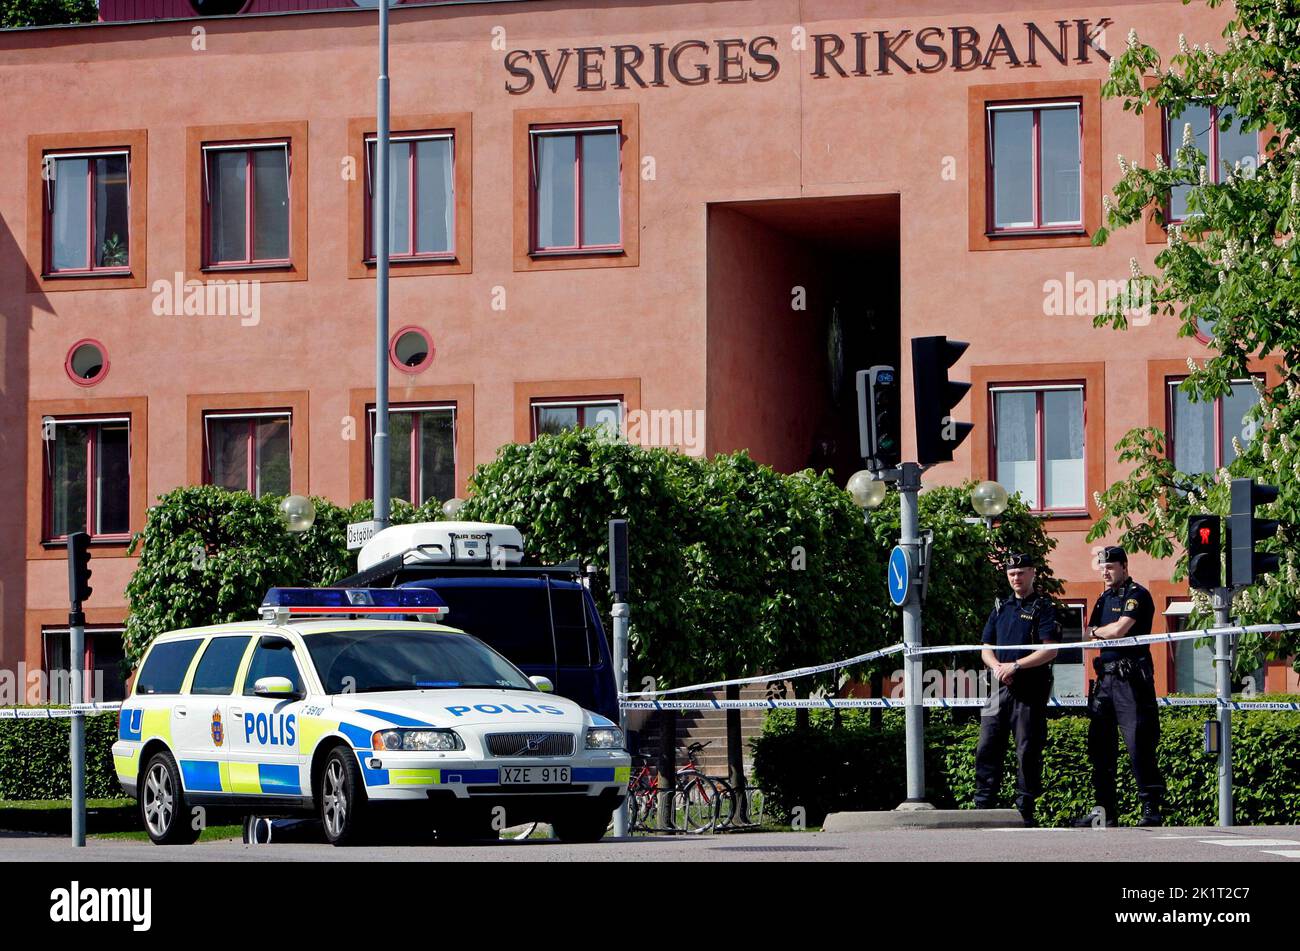 Several men forced their way into Securita's cash center in central Linköping with a wheel loader on Thursday morning. They didn't get any money, but a suspected bomb was left at the scene. At 11 o'clock in the morning, no suspected perpetrators had yet been arrested. Stock Photo